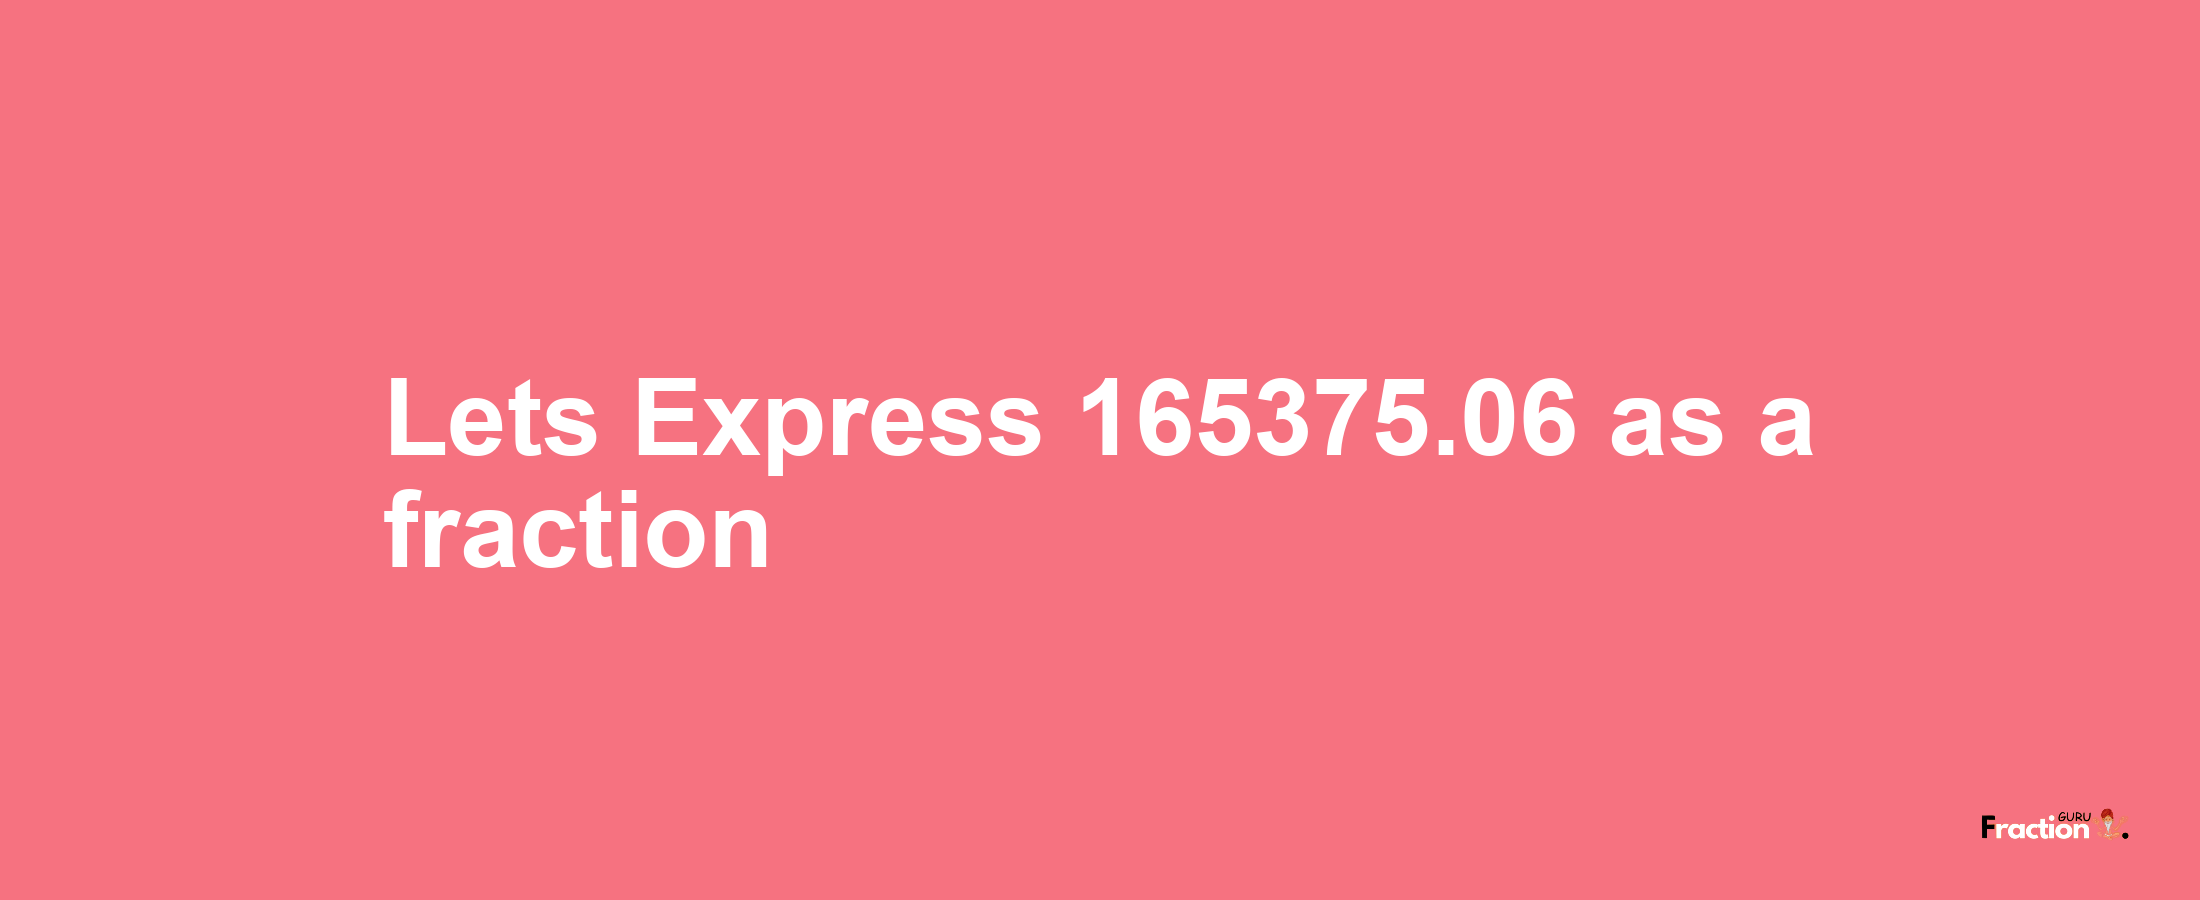 Lets Express 165375.06 as afraction